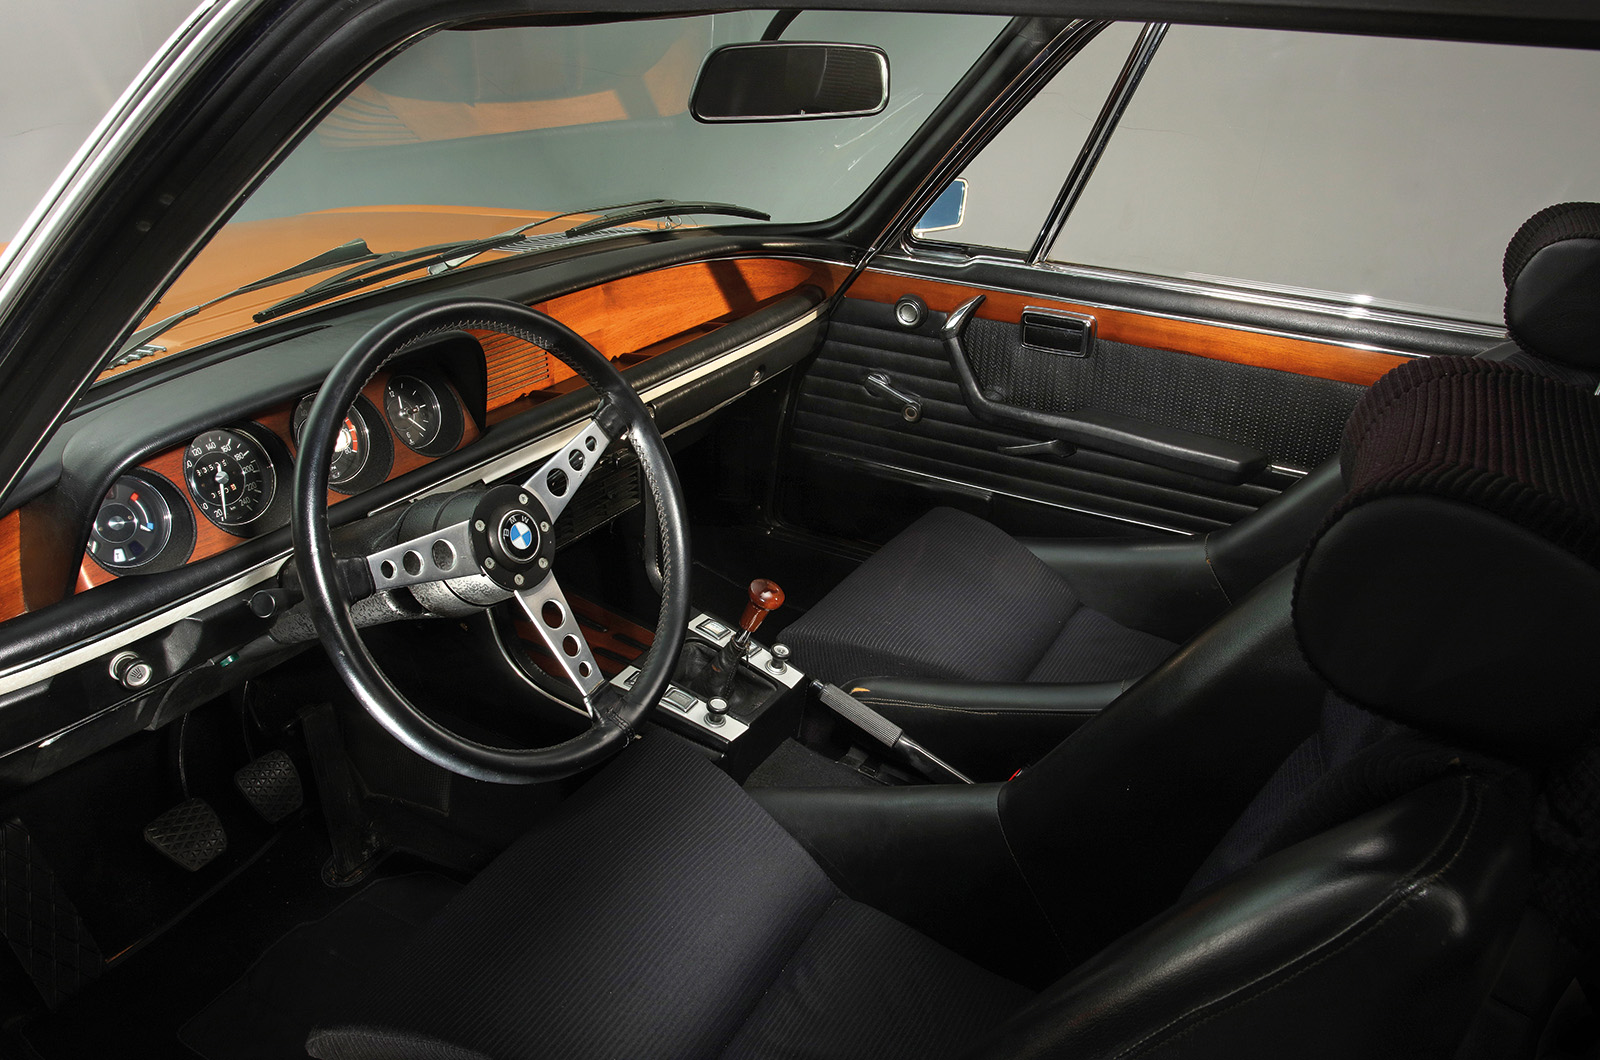 Classic & Sports Car – BMW E9: the birth of an icon